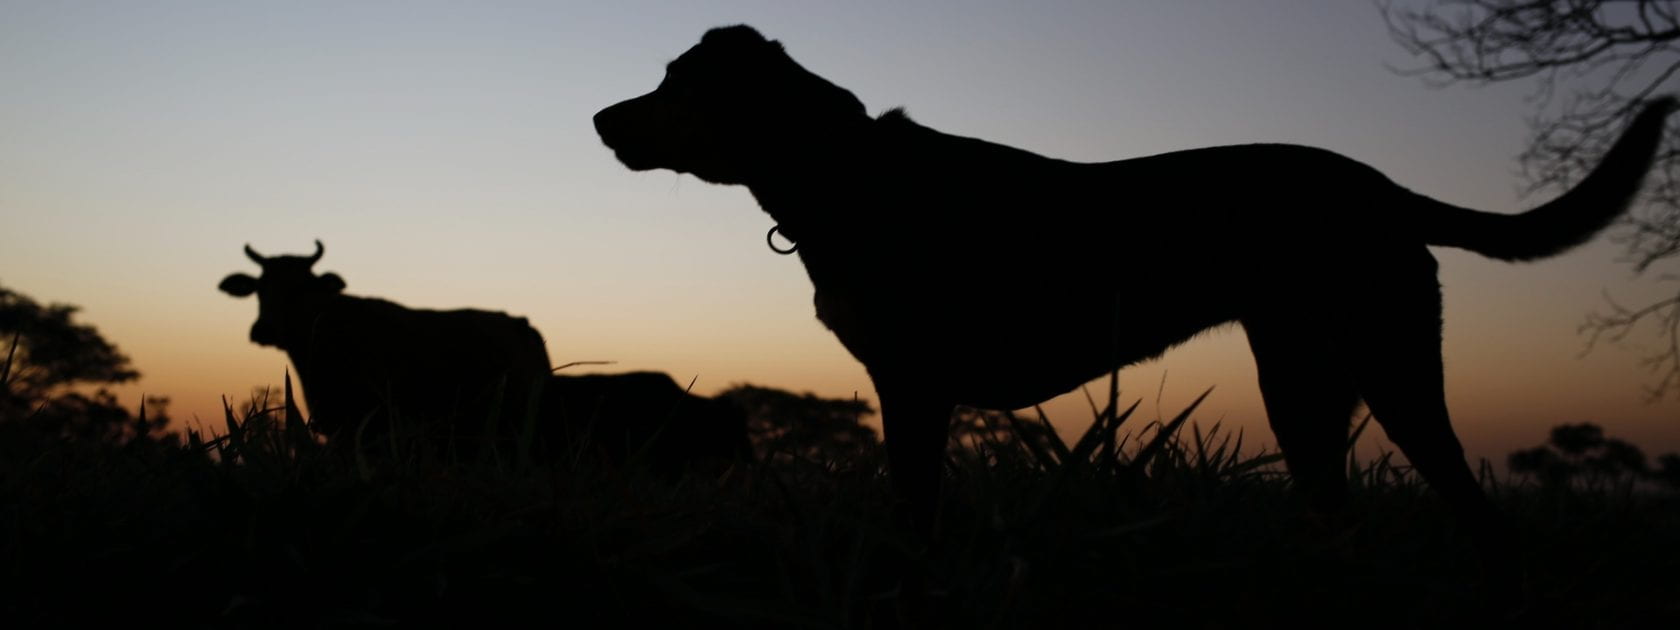 Silhouettes of a dog and a cow standing in a field.